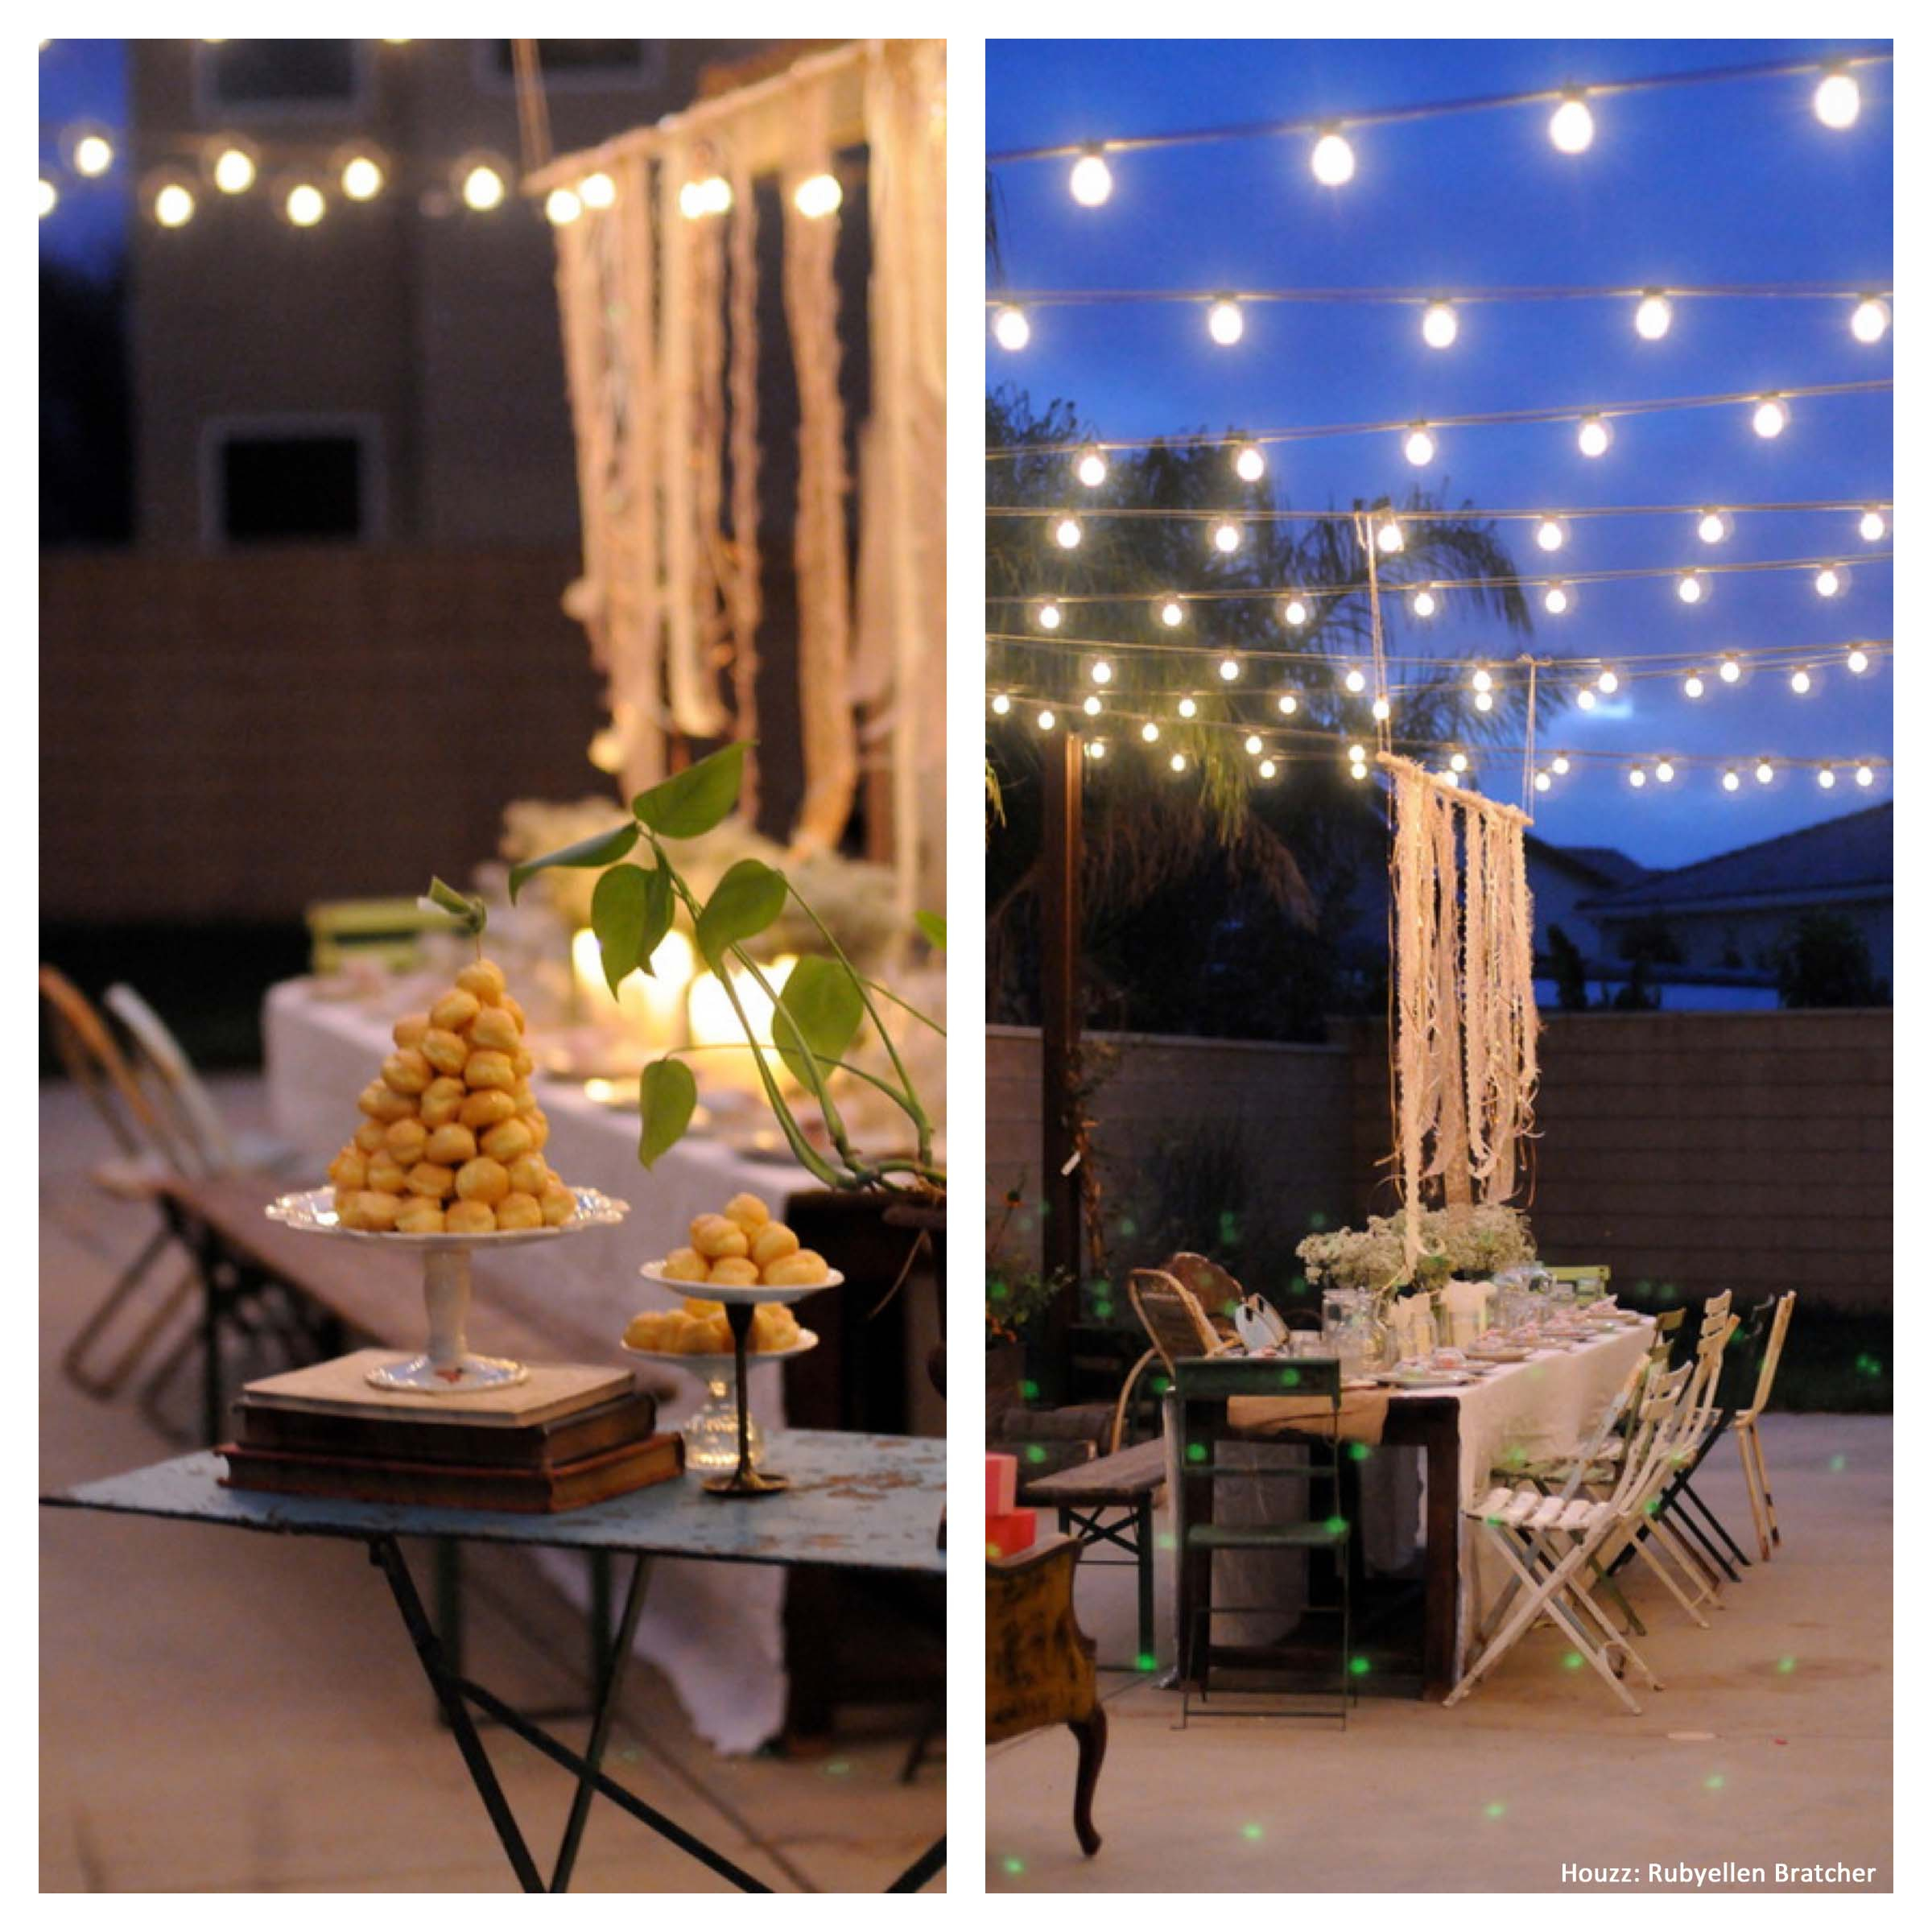 22.SIMPHOME.COM backyard party ideas outdoor living spaces homes tradition